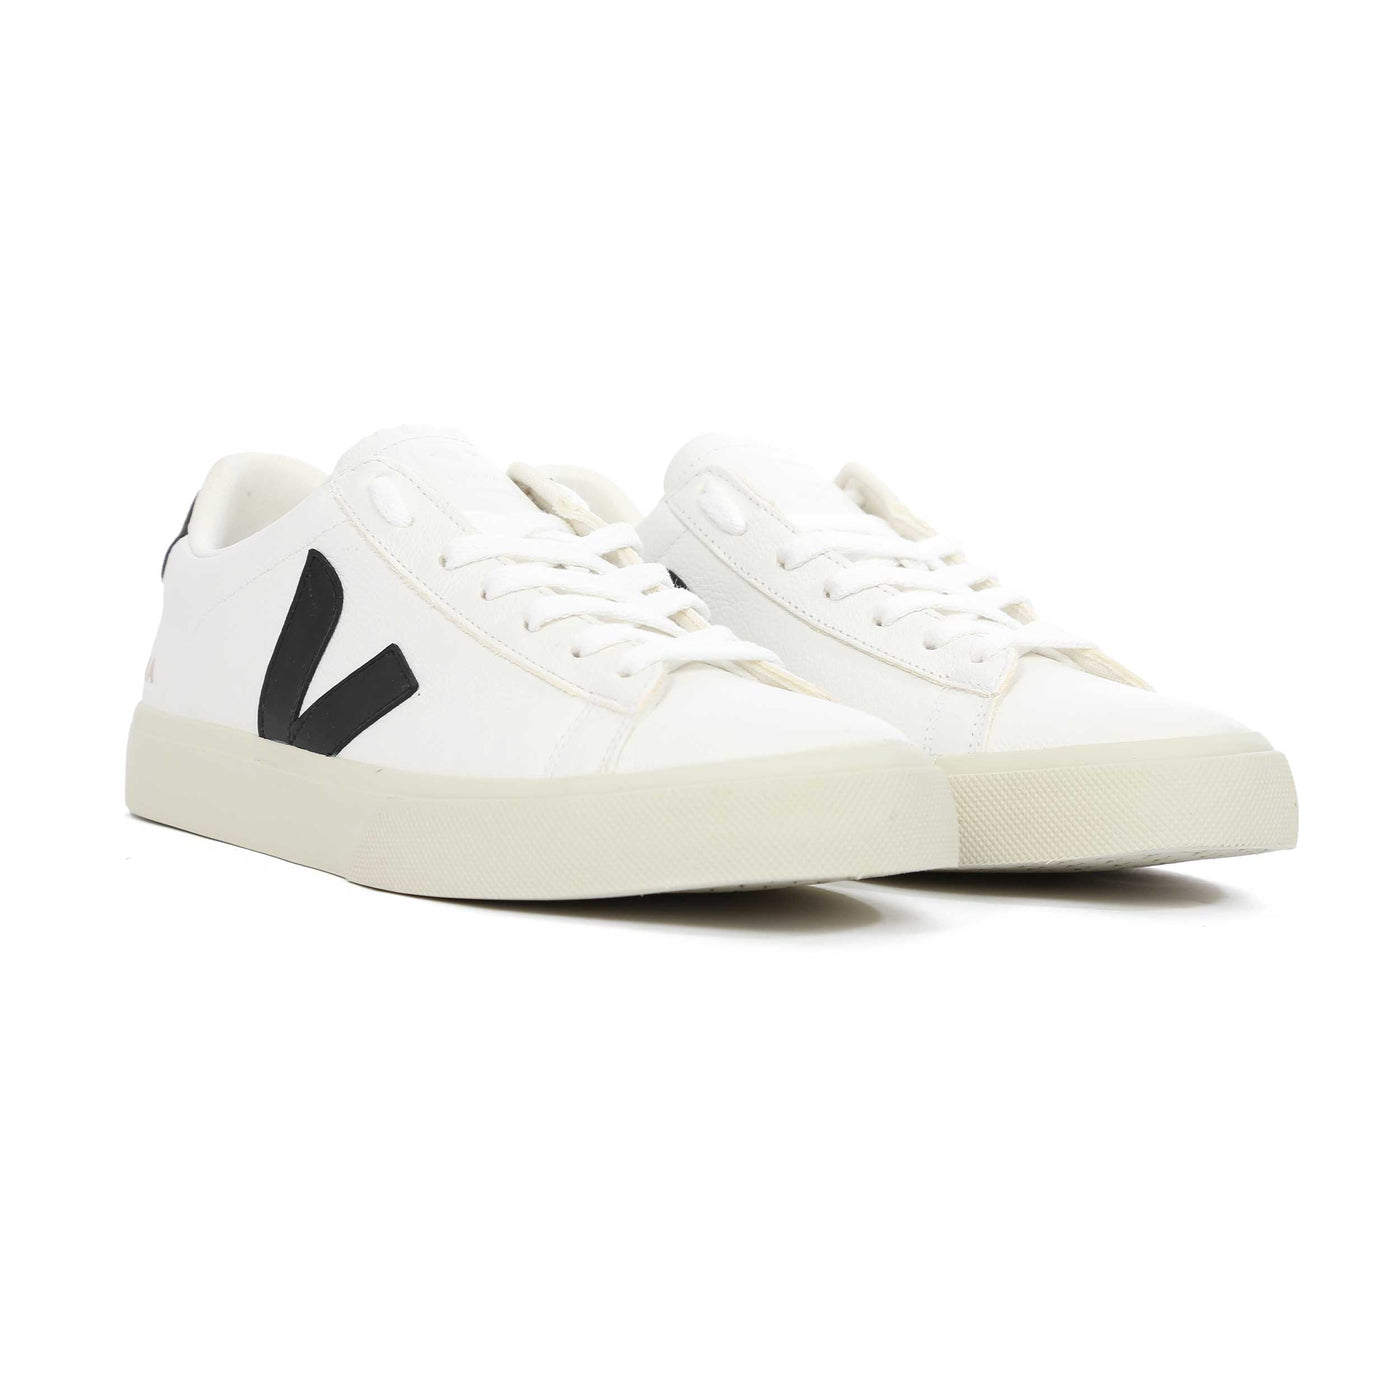 Veja Campo Trainer in Extra White & Black Pair